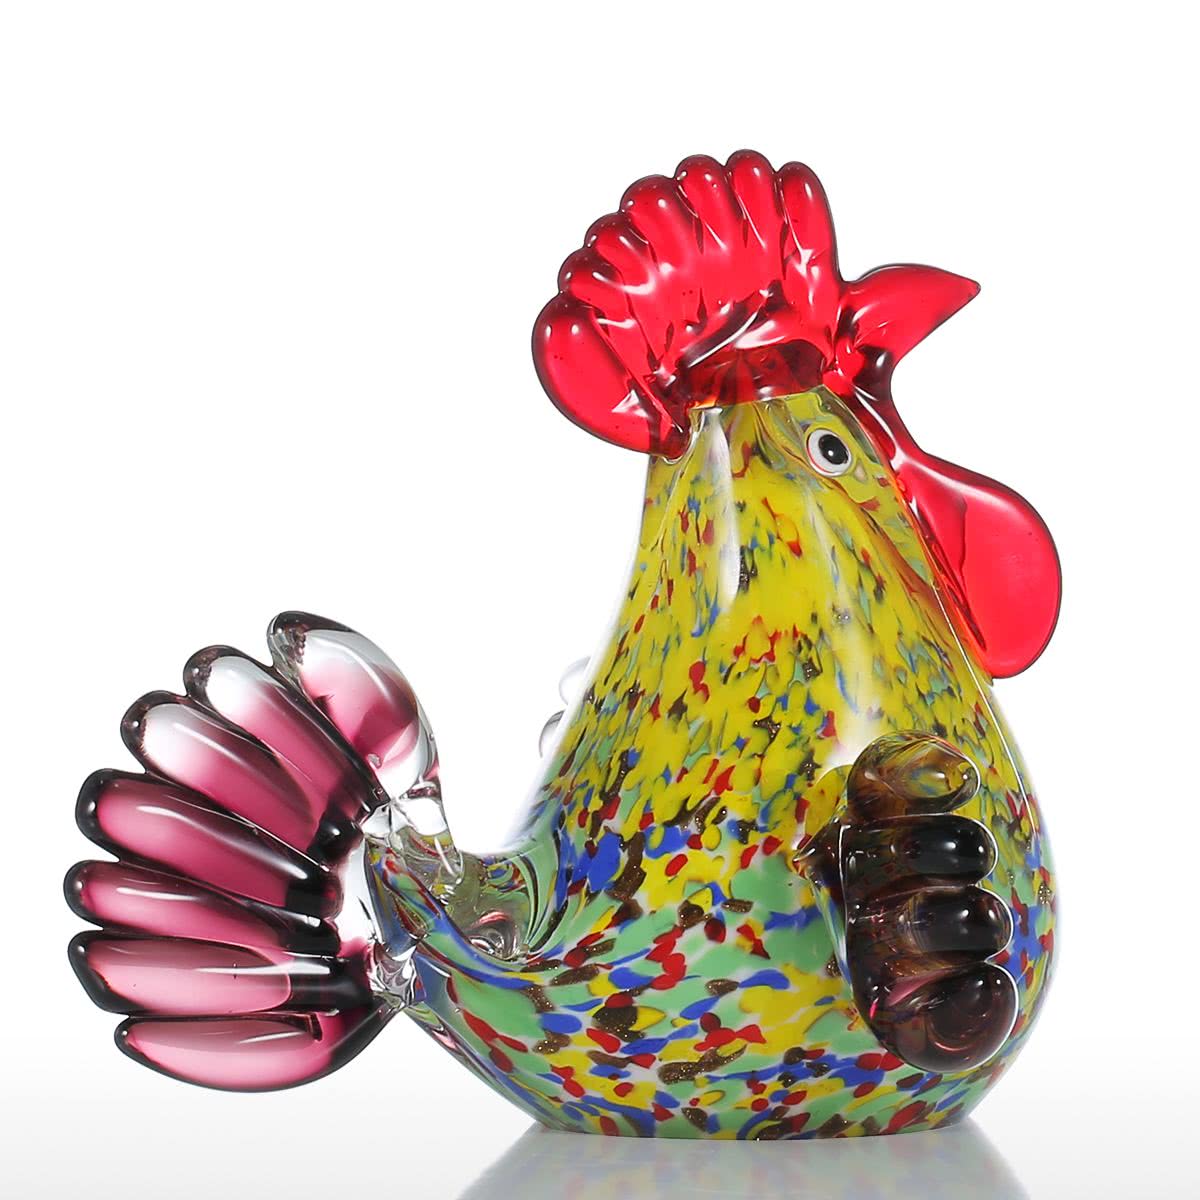 Glass Animal Ornaments and Glass Sculpture with Rooster Kitchen Decor and Chicken Decor for Glass Christmas Ornaments